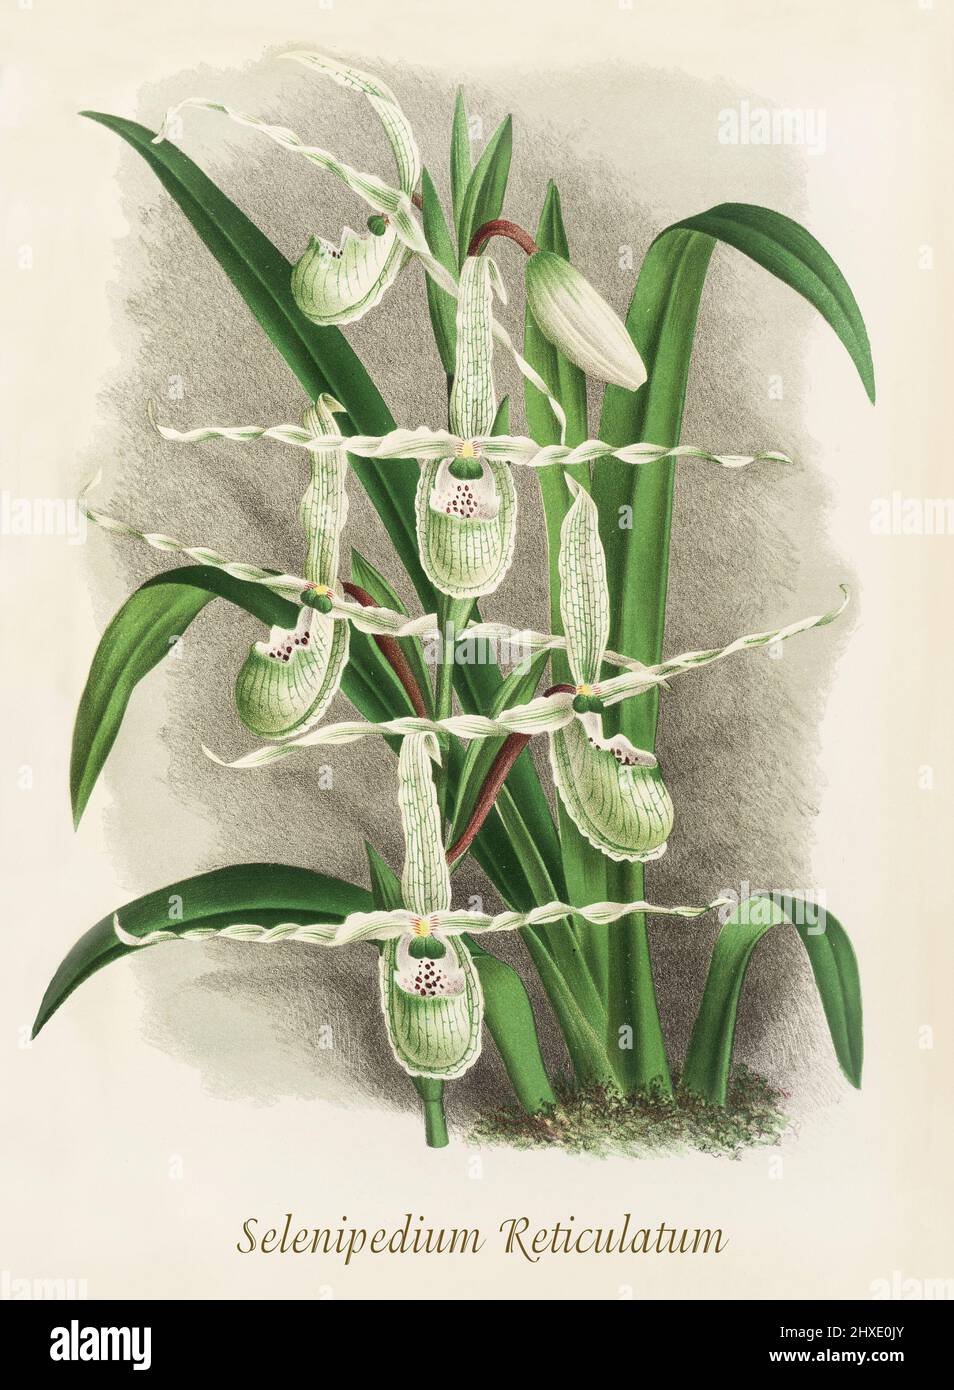 Selenipedium reticulatum aka  Phragmipedium boissierianuman an orchid native to Ecuador and Peru. From Iconographie des Orchidees, a magazine of botanical illustrations published by Jean Jules Linden (1817-1898) was a Belgian botanist, explorer and horticulturist who specialised in orchids. Stock Photo